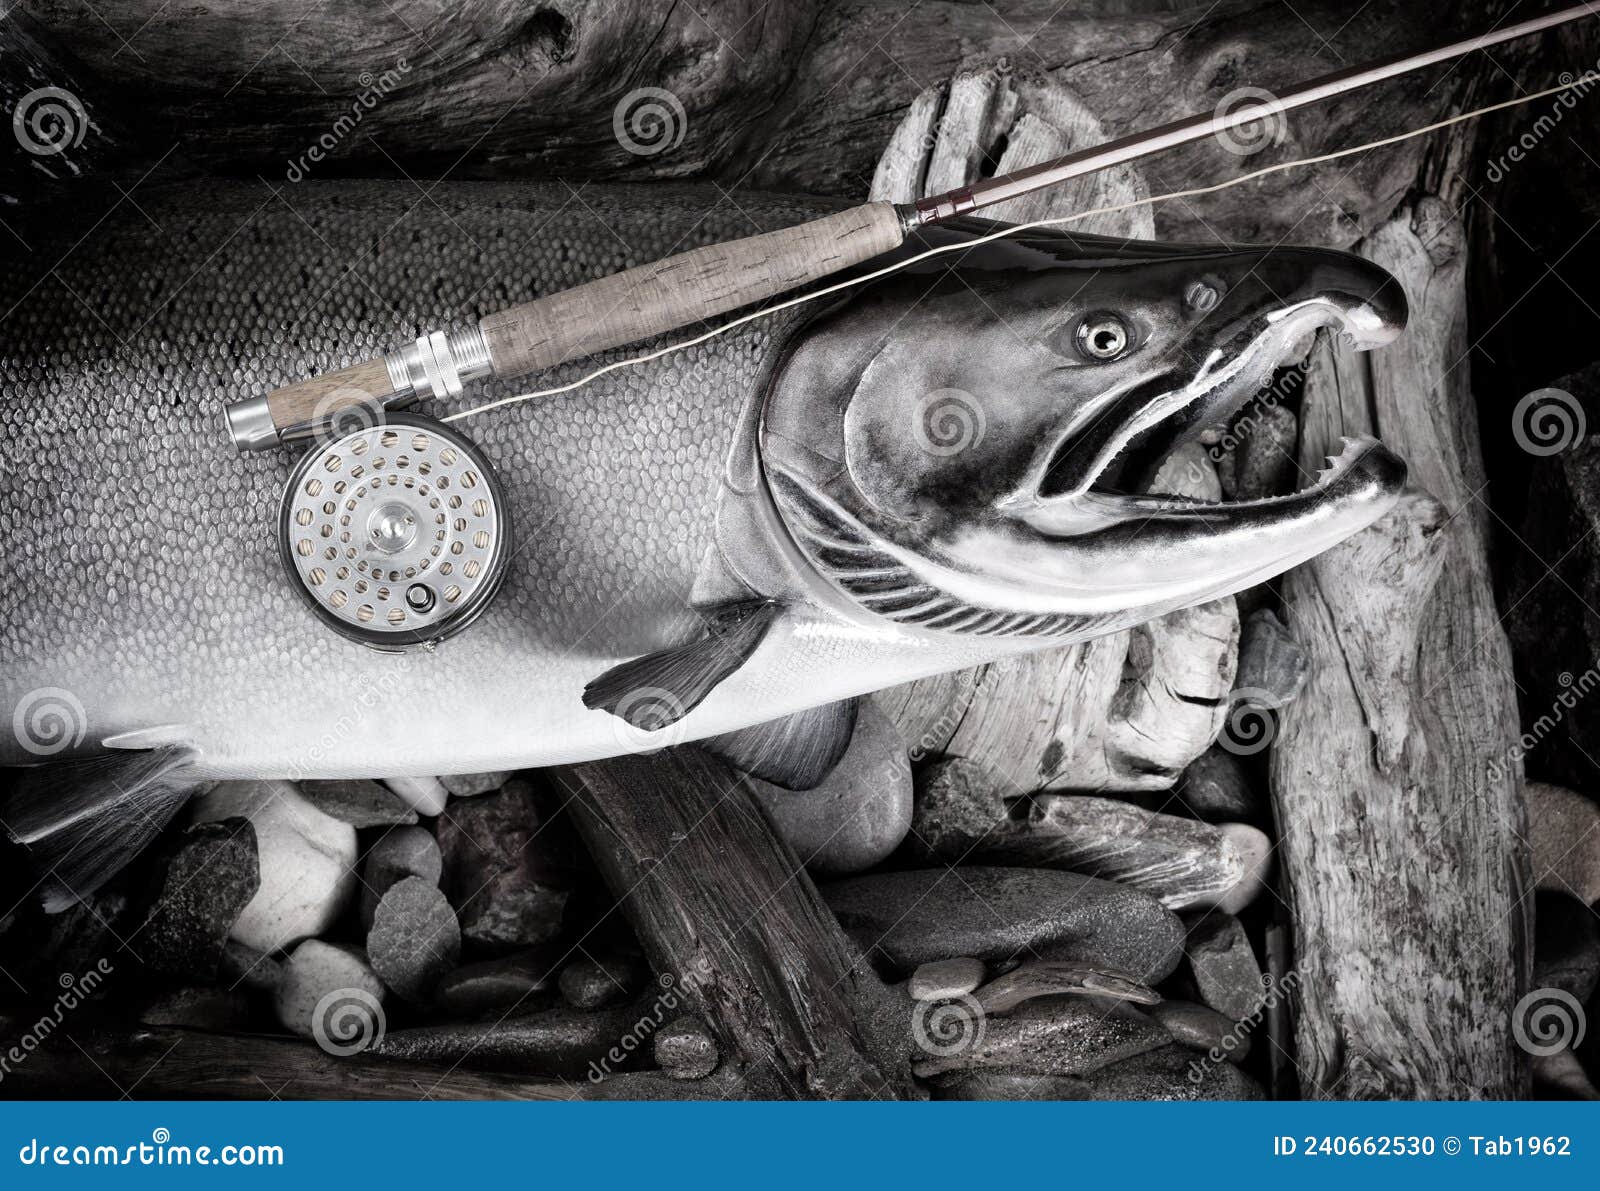 Vintage Fly Fishing Equipment on Large Salmon in Riverbed Setting